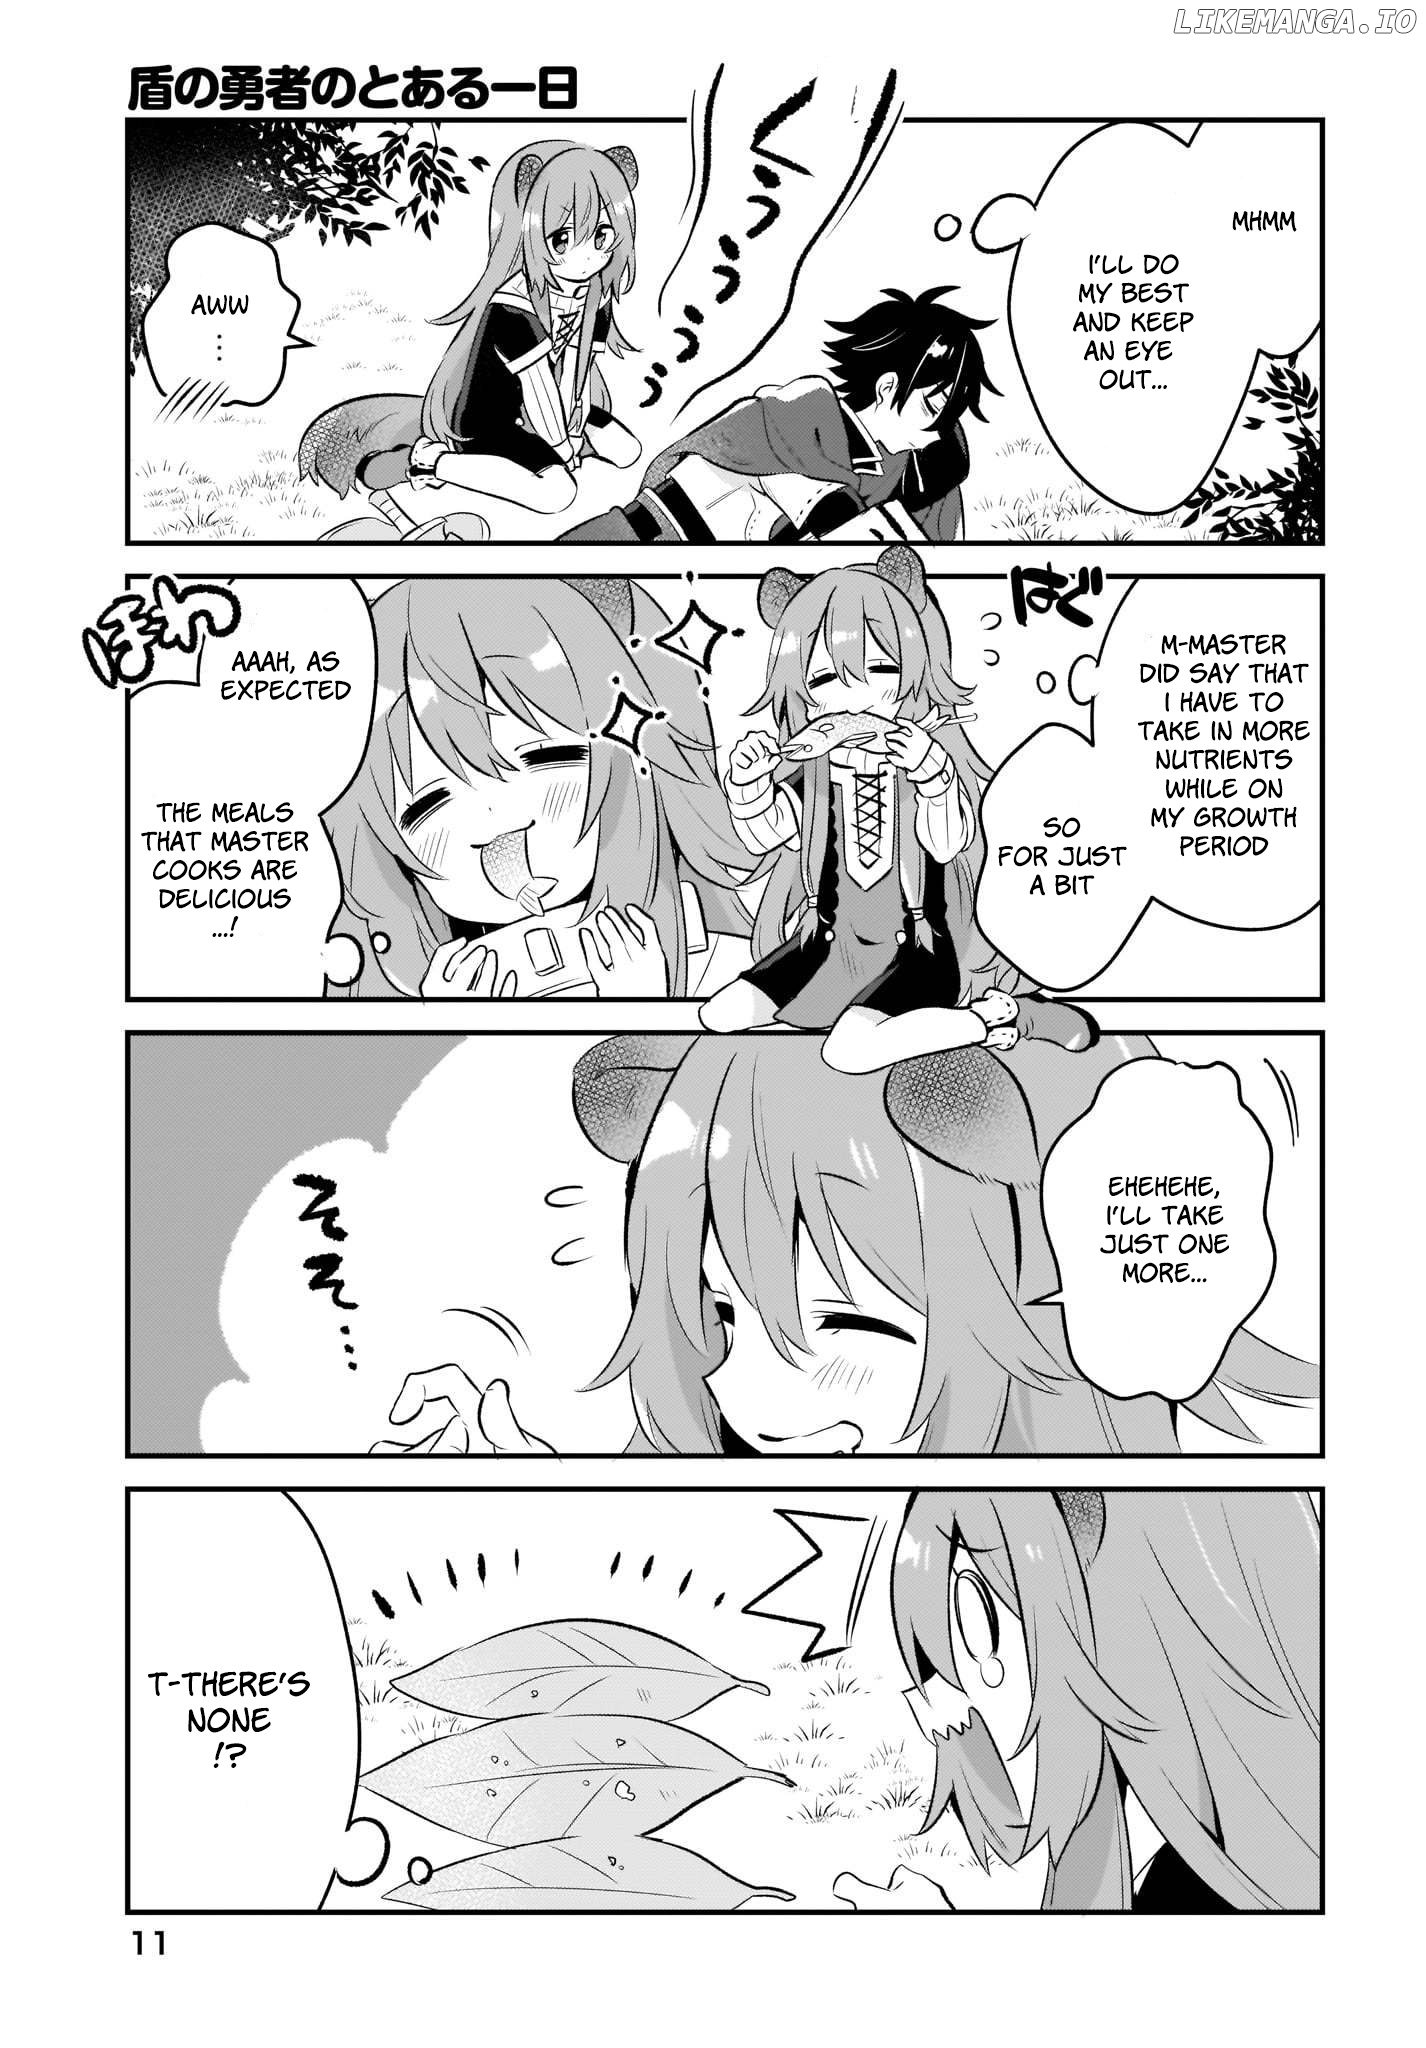 A Day In The Life Of The Shield Hero chapter 1 - page 5